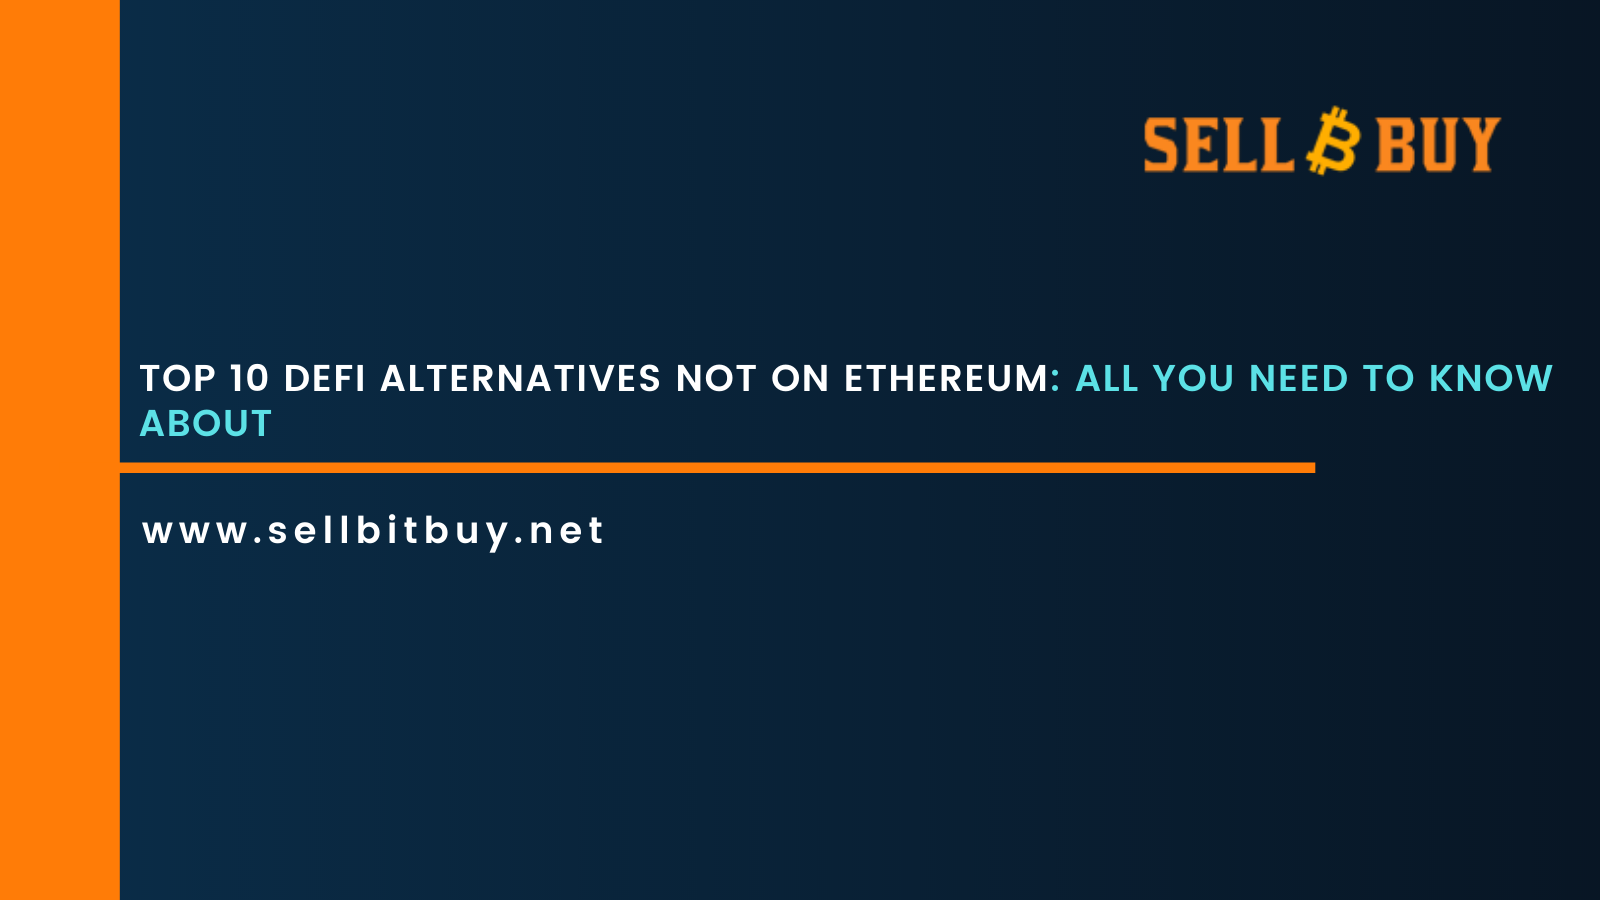 Top 10 DeFi Alternatives Not on Ethereum: All You Need To Know About